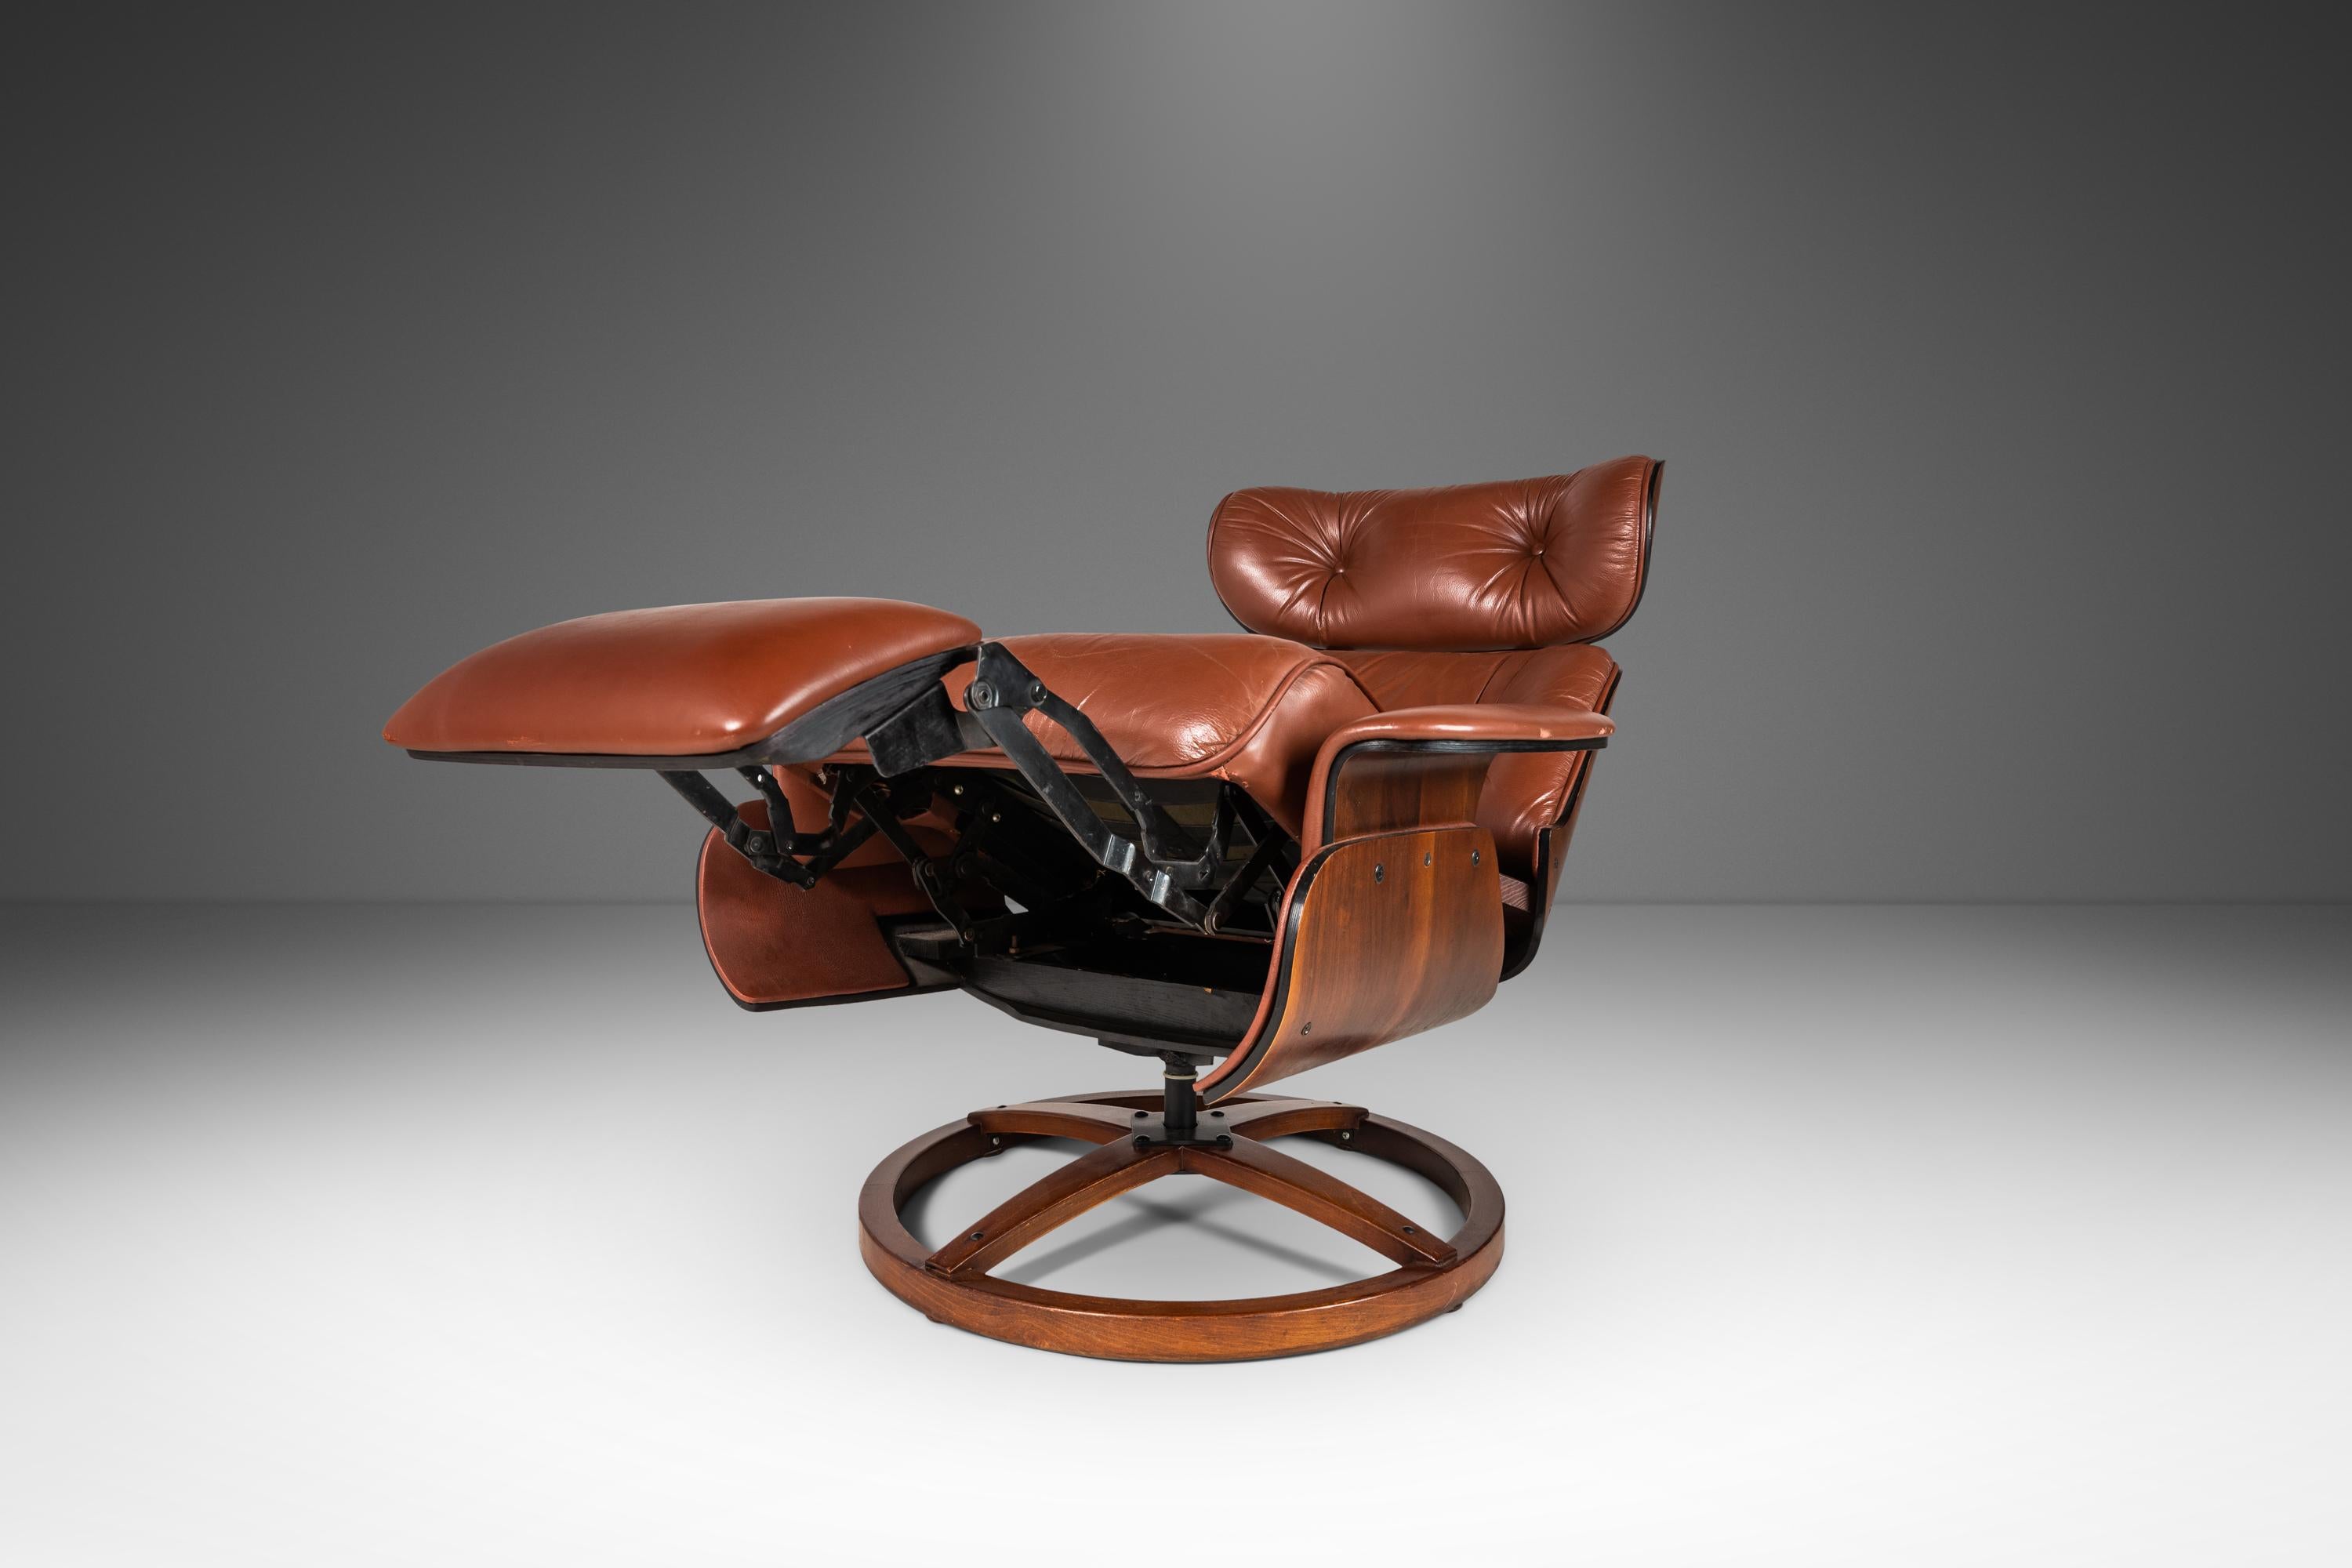 A rare 1960s design drawing influences from the Iconic Model 670 and Model 671 Eames Chair and Ottoman. This Lounge chair is found in the original brown Naugahyde upholstery which rests in it's sculpted walnut form. The chair is then set on a